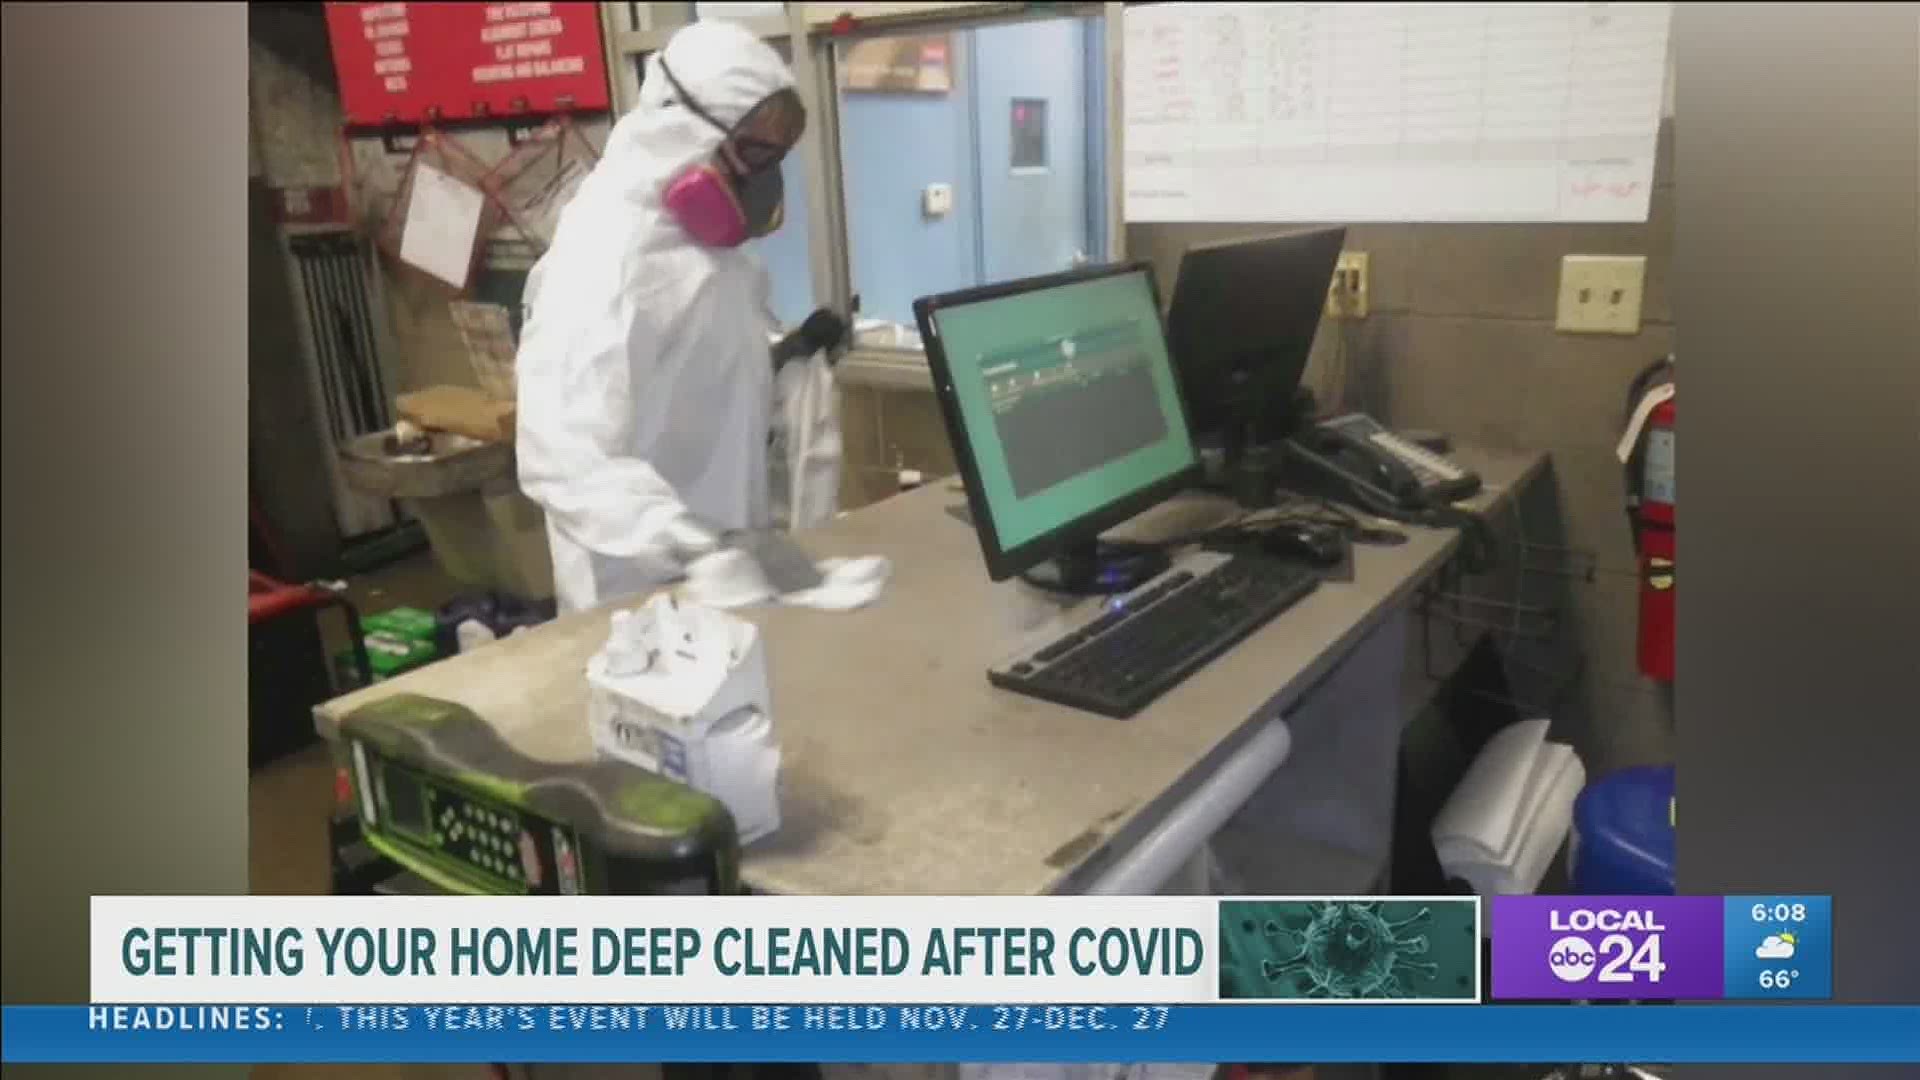 “As people started to go back to work, we saw a rise in the COVID cleaning,” said Marcus Fors, PuroClean owner.